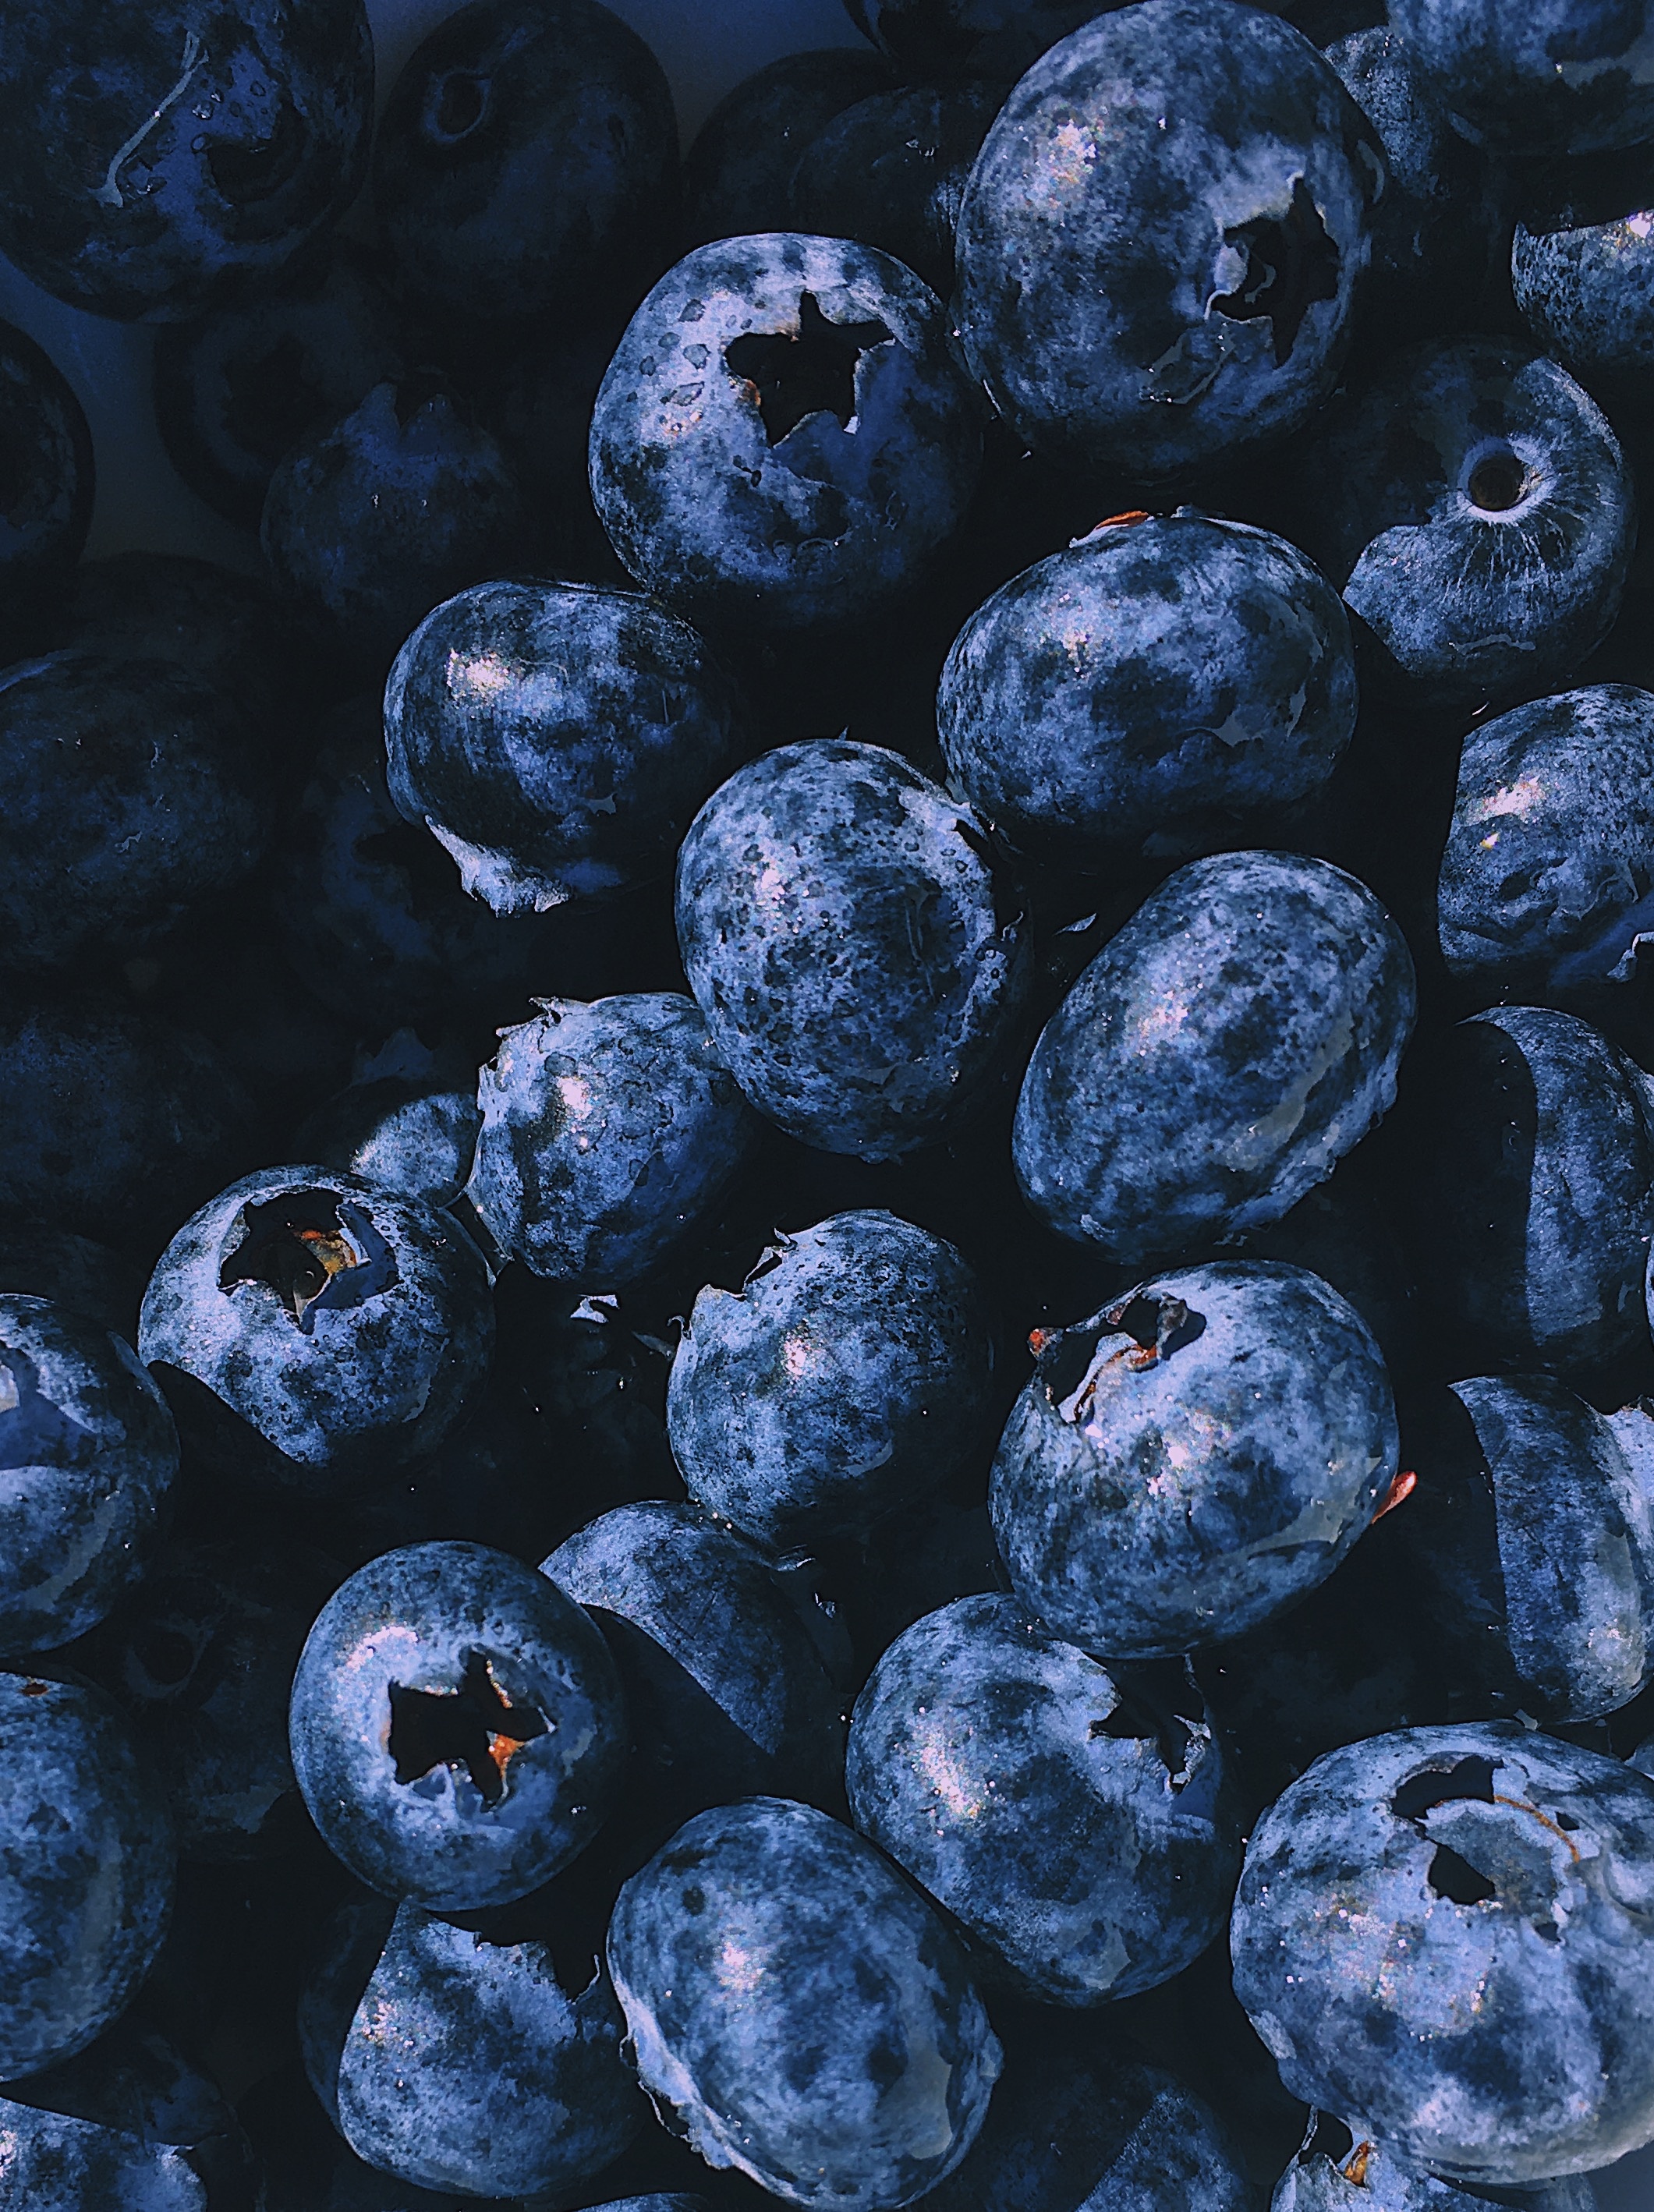 Best blueberry photos, Free stock images, Picture-perfect fruit, High-resolution download, 2130x2840 HD Handy